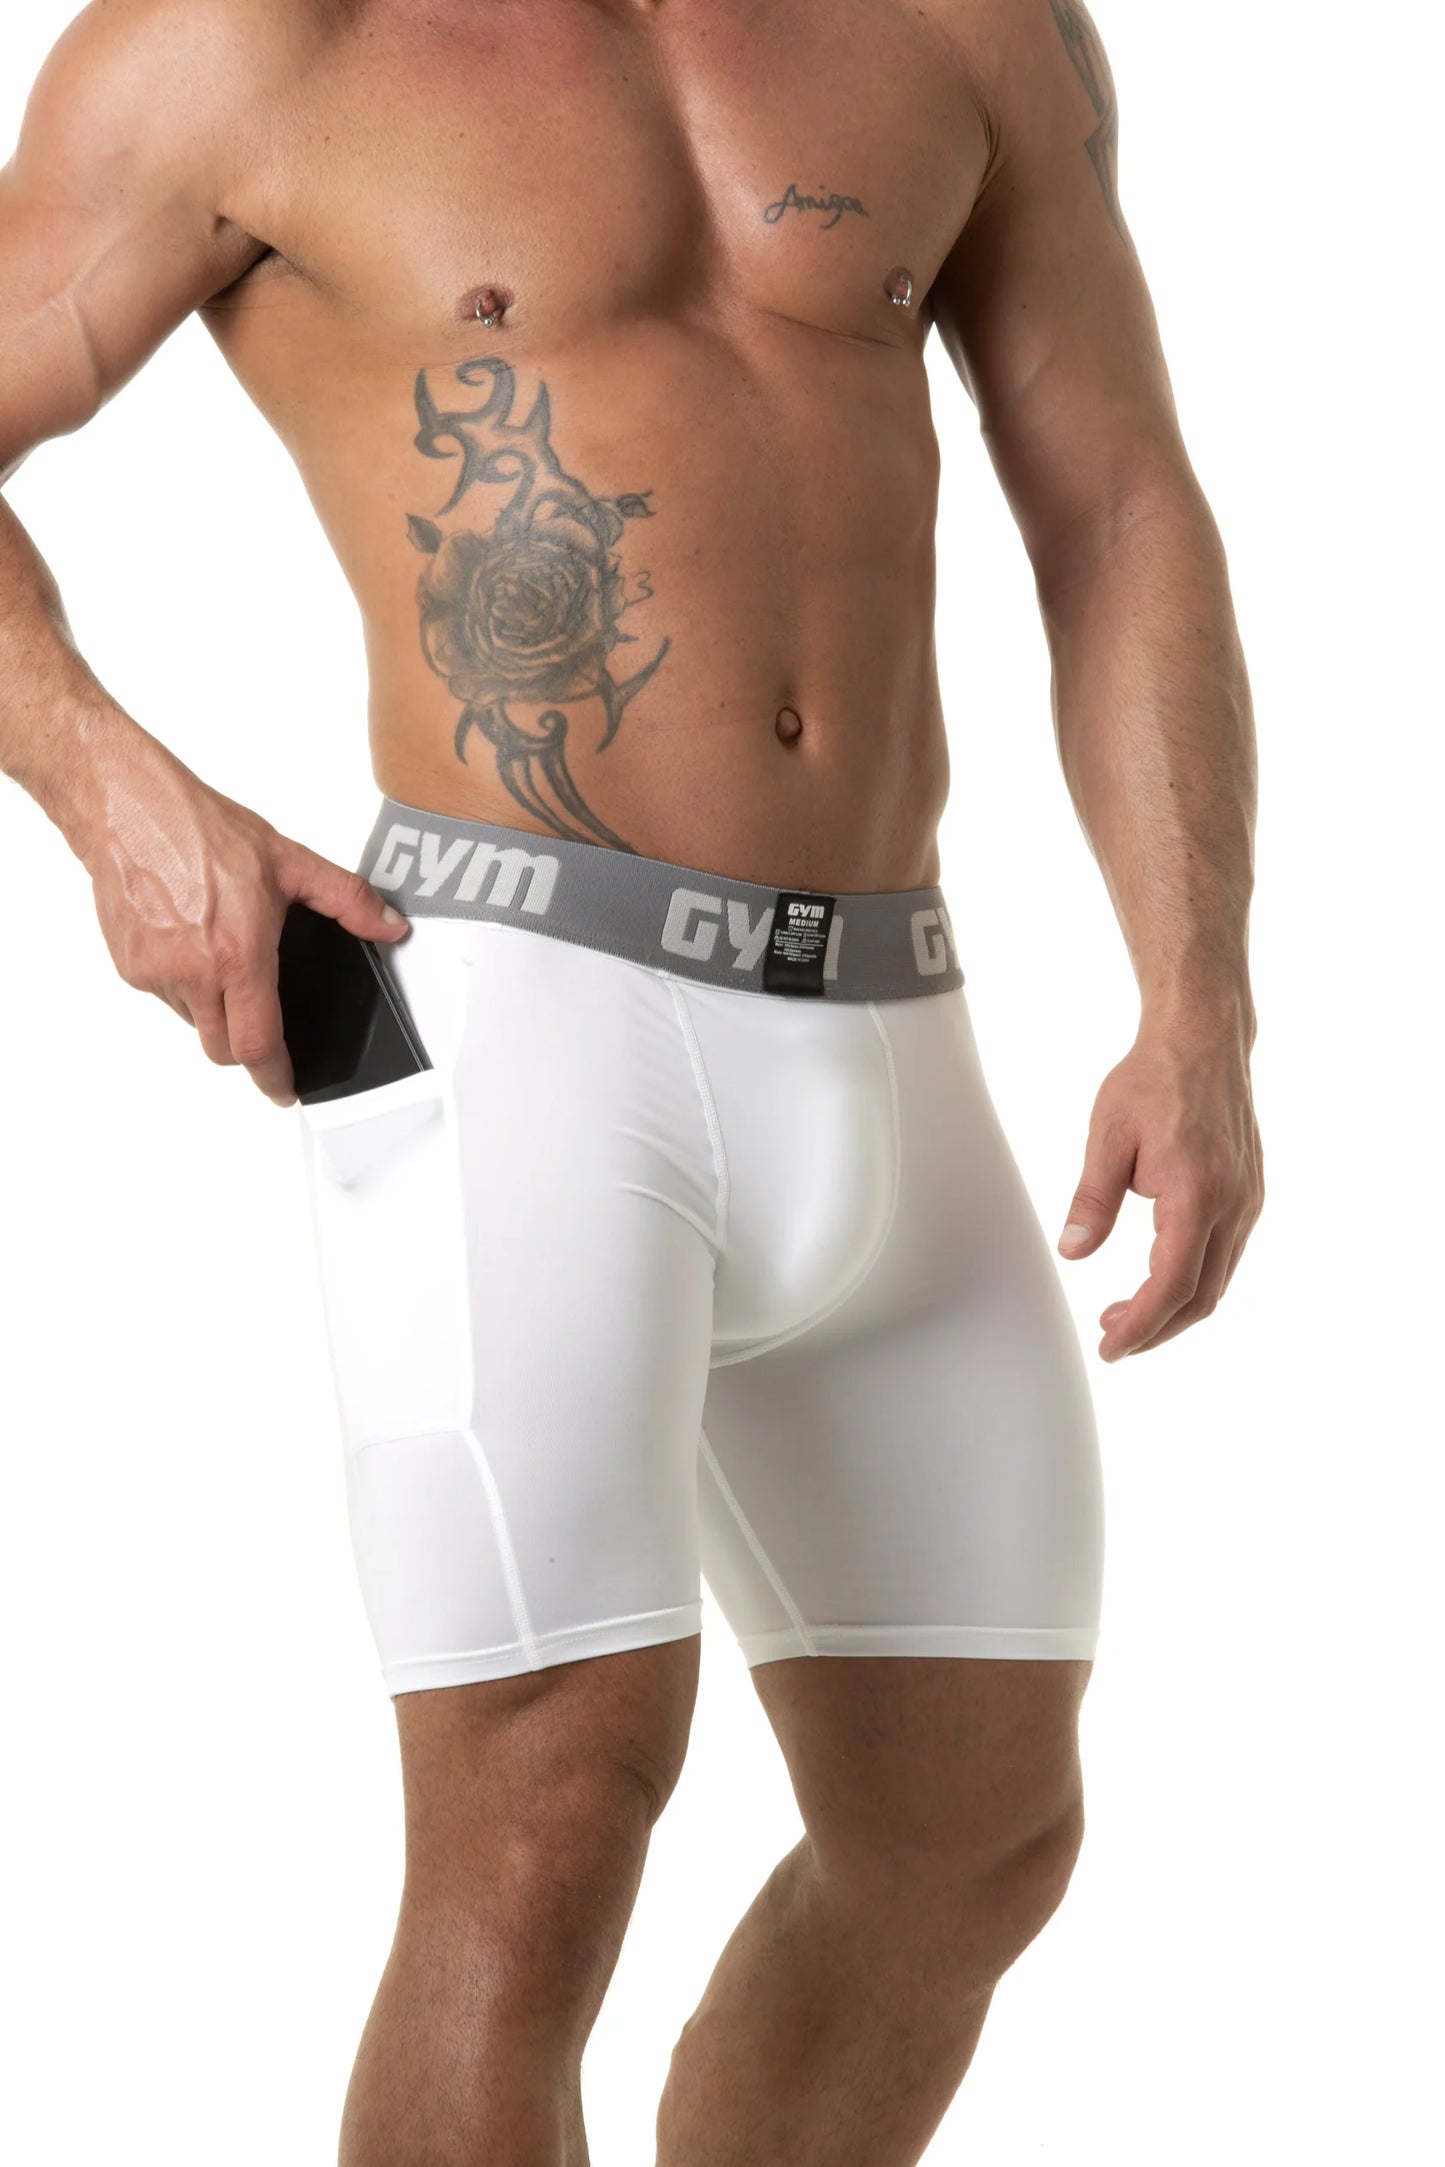 GYM Compression Shorts with Small Phone Pocket